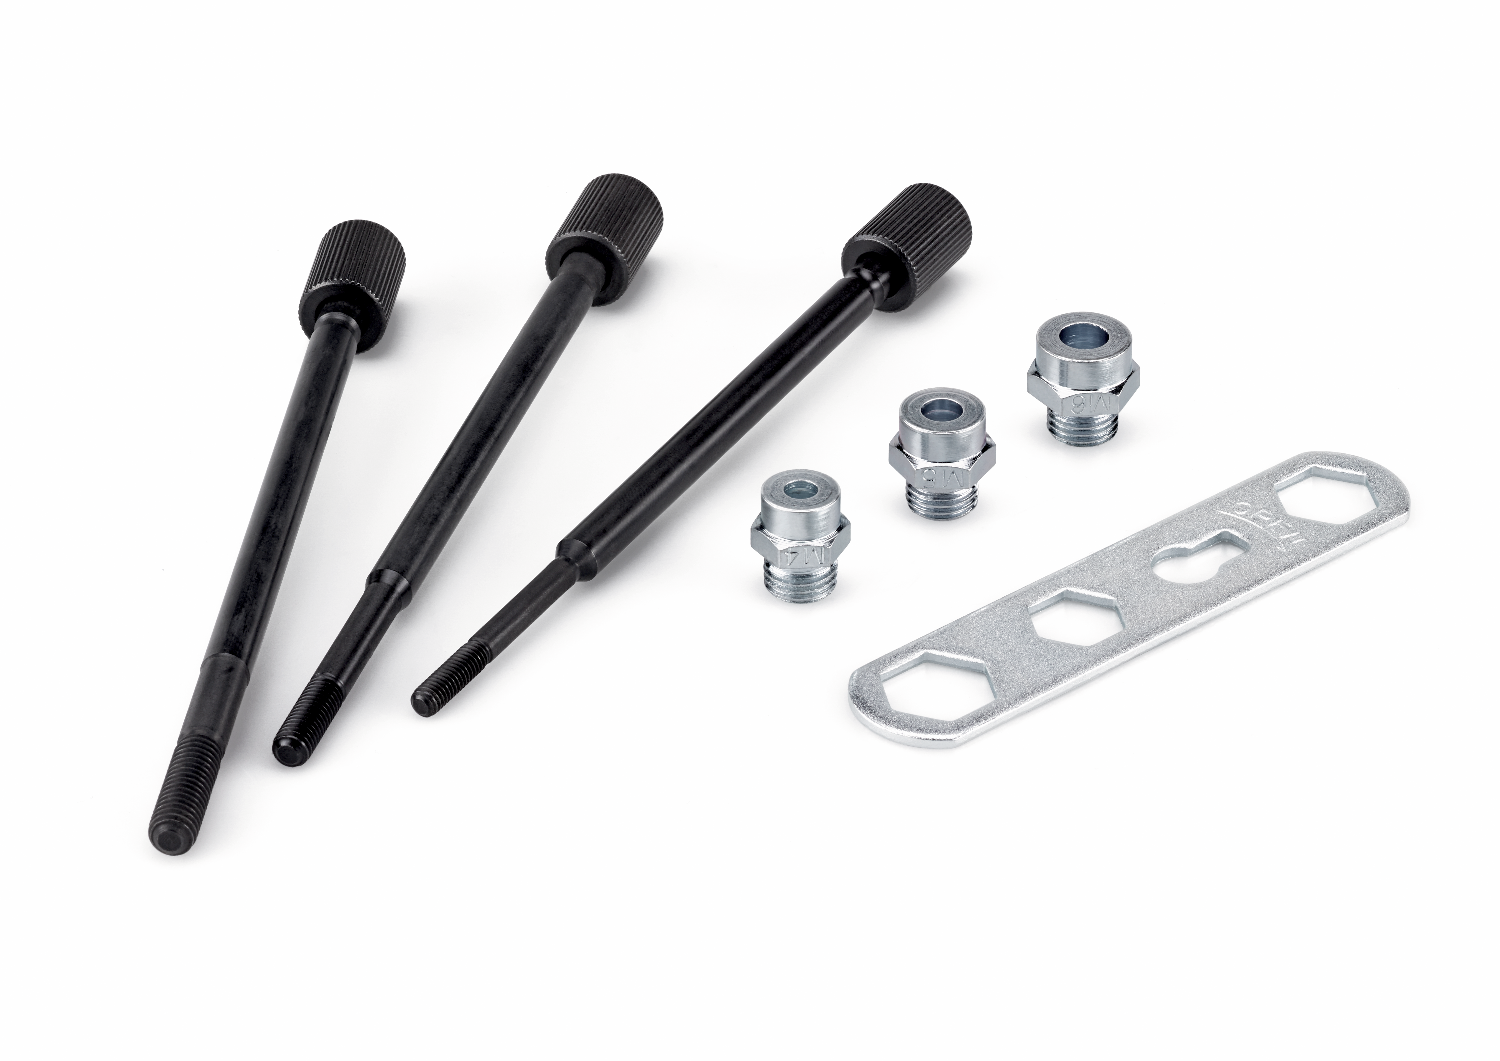 Integrated mounts for M4, M5, M6, suitable threaded mandrel adapter and mounting key